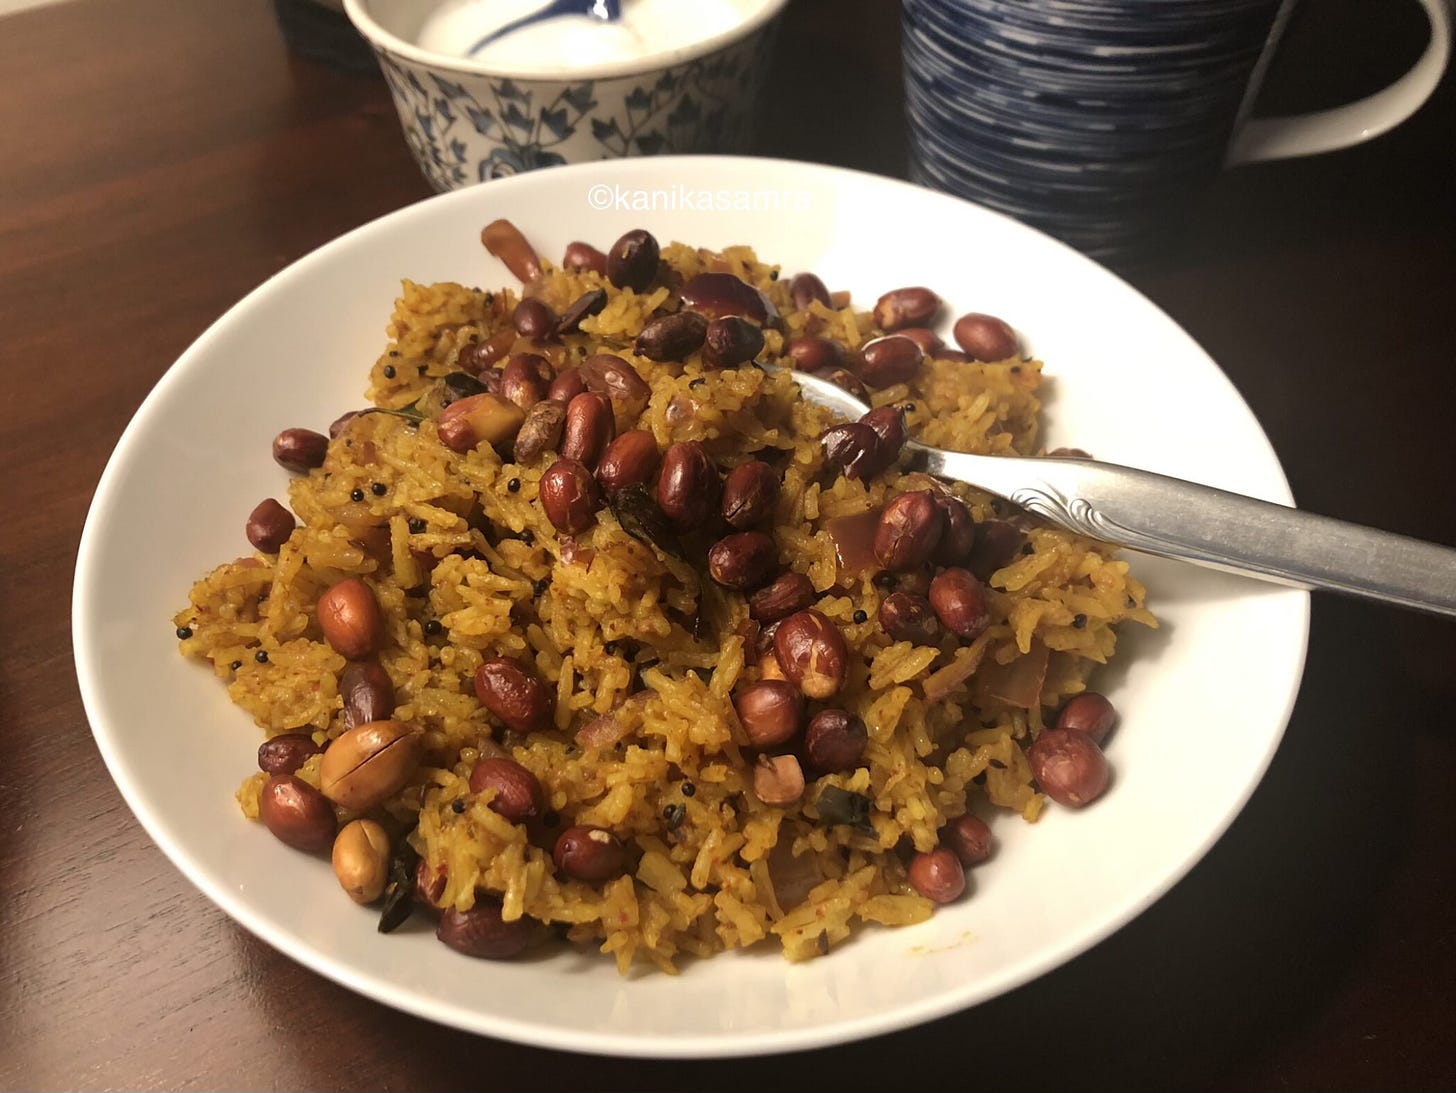 Tamarind rice made with leftover rice served in a white bowl